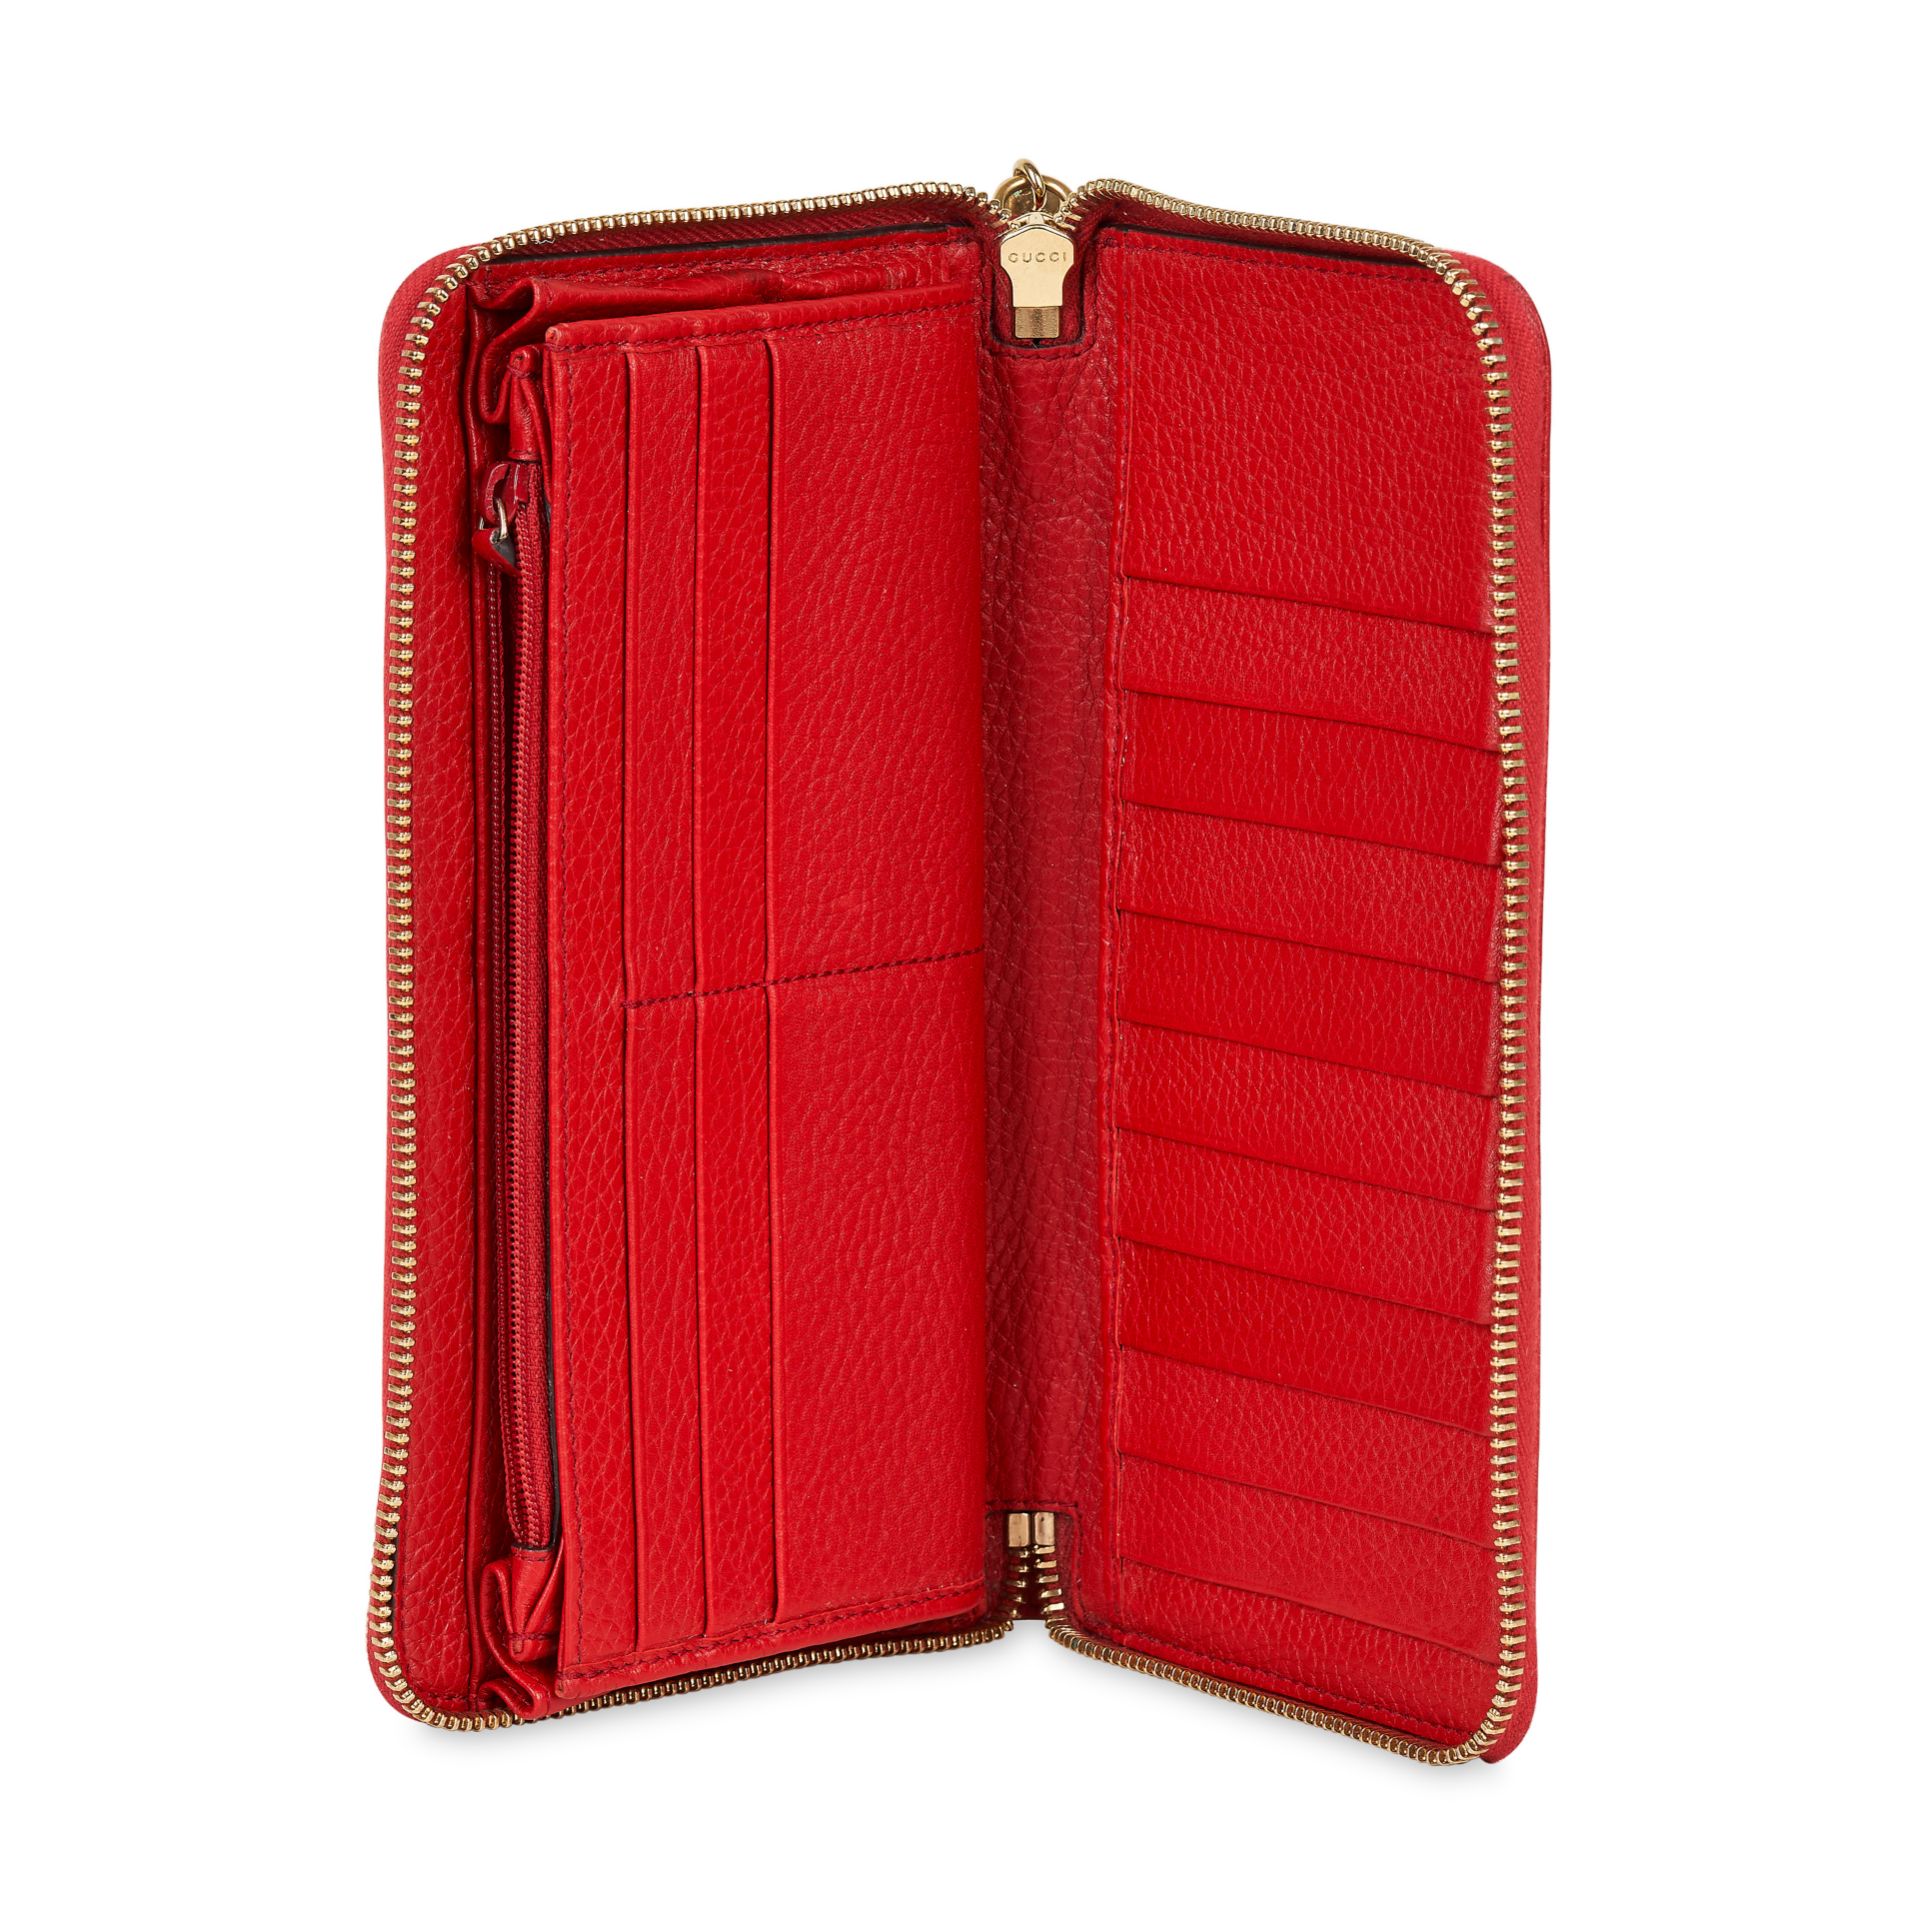 GUCCI RED LEATHER SOHO WALLET - Image 2 of 2